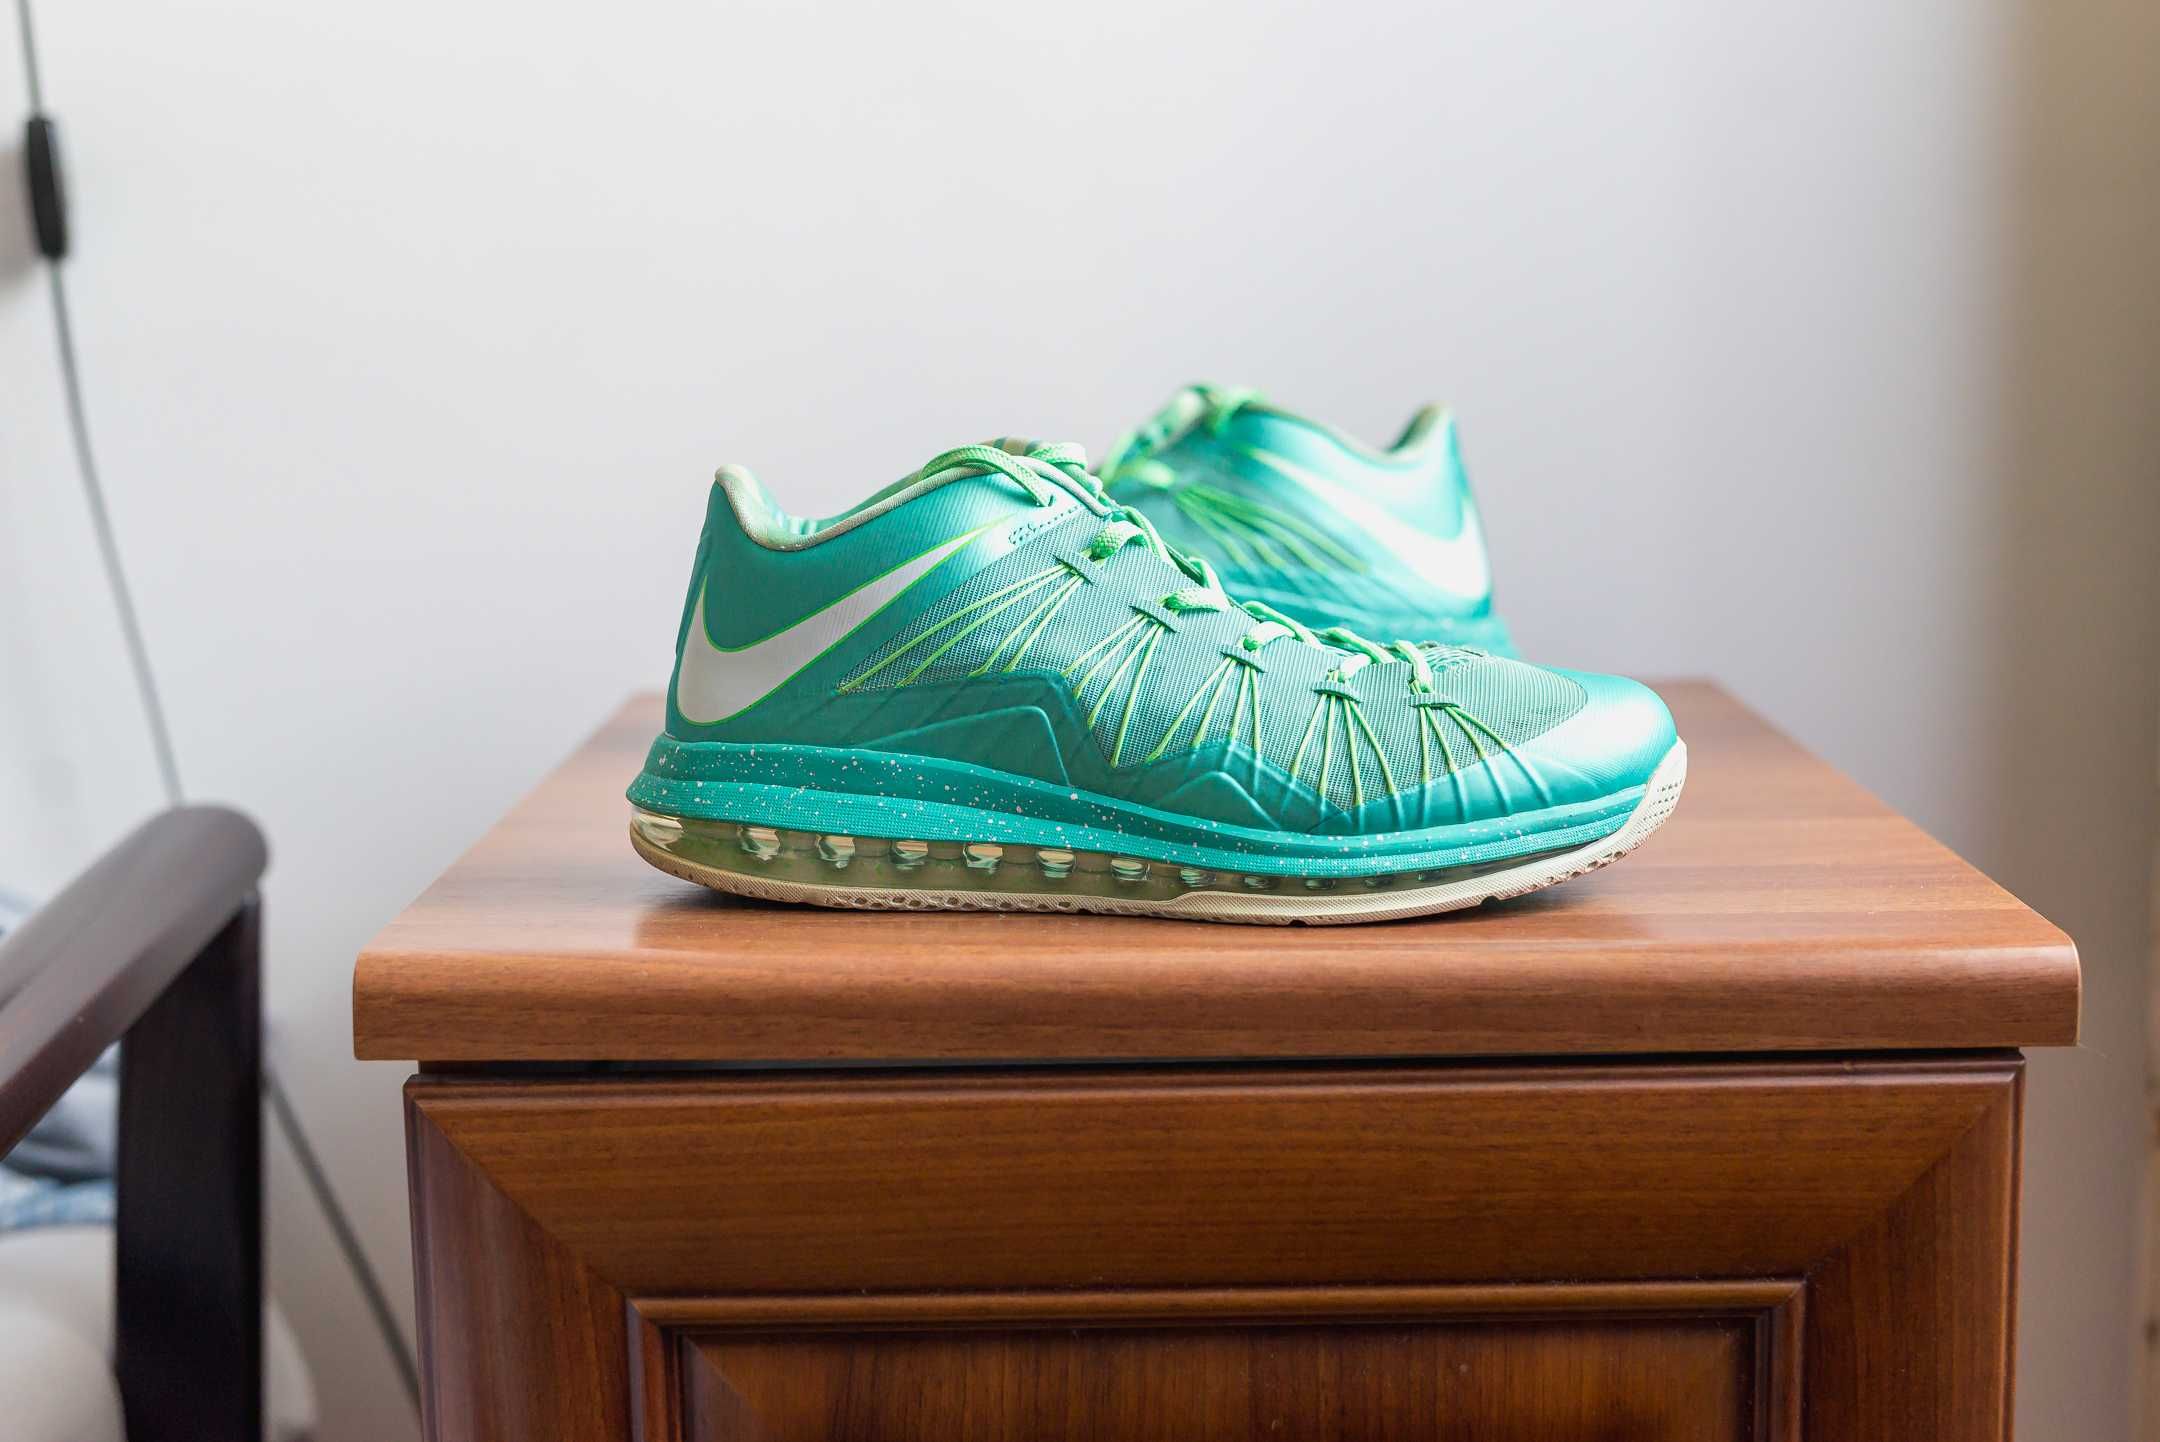 Buty Nike LeBron X Low "Easter" r. 45,5